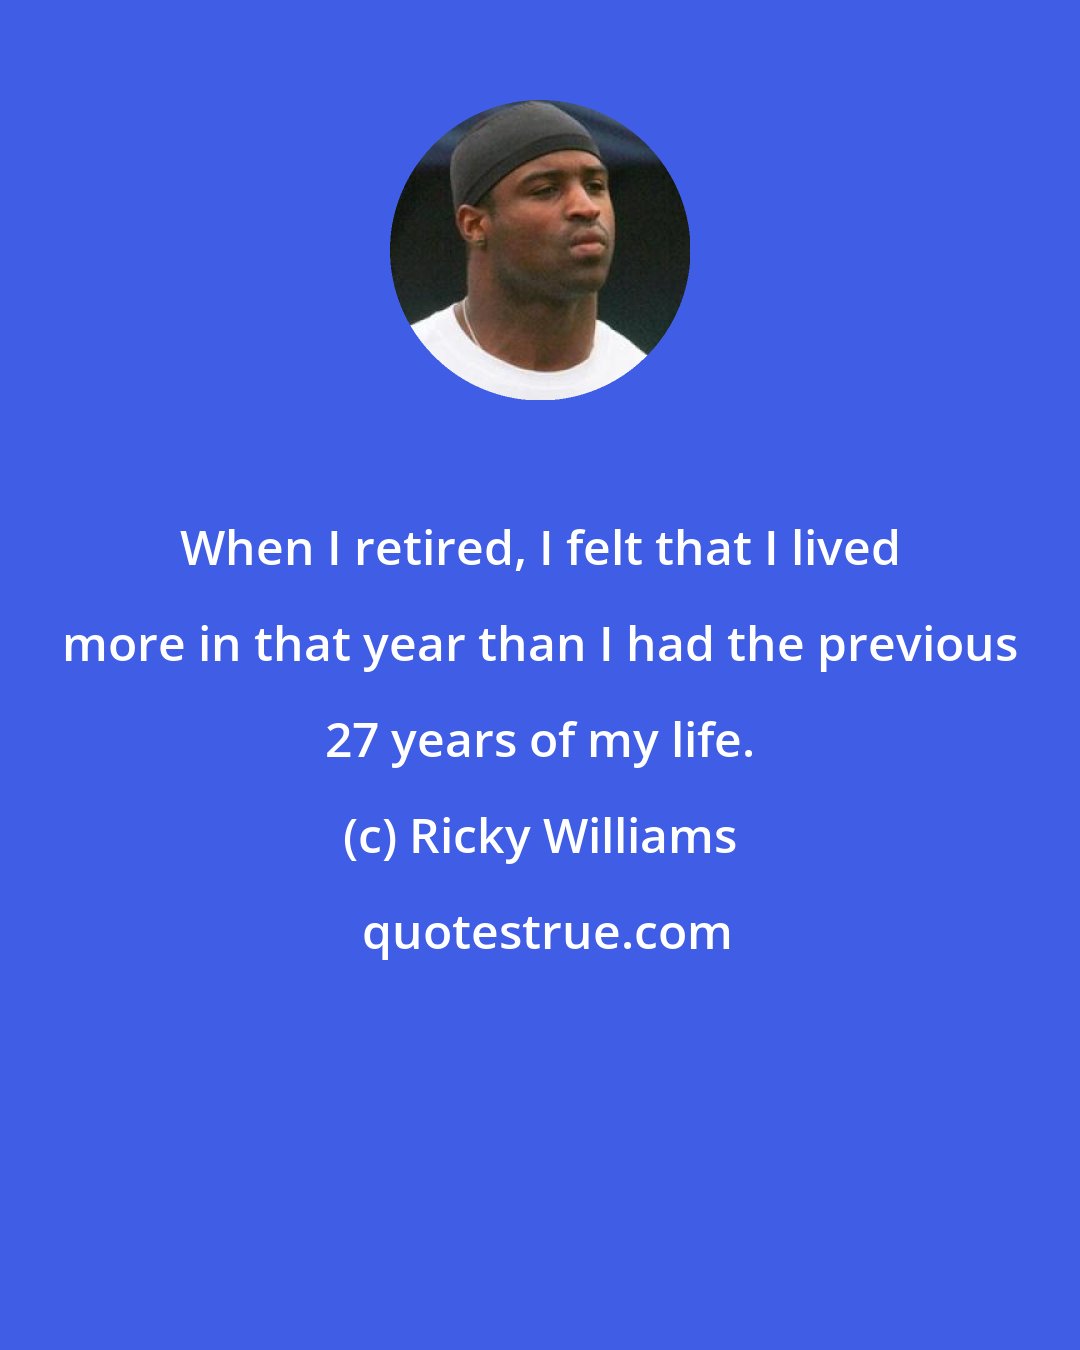 Ricky Williams: When I retired, I felt that I lived more in that year than I had the previous 27 years of my life.